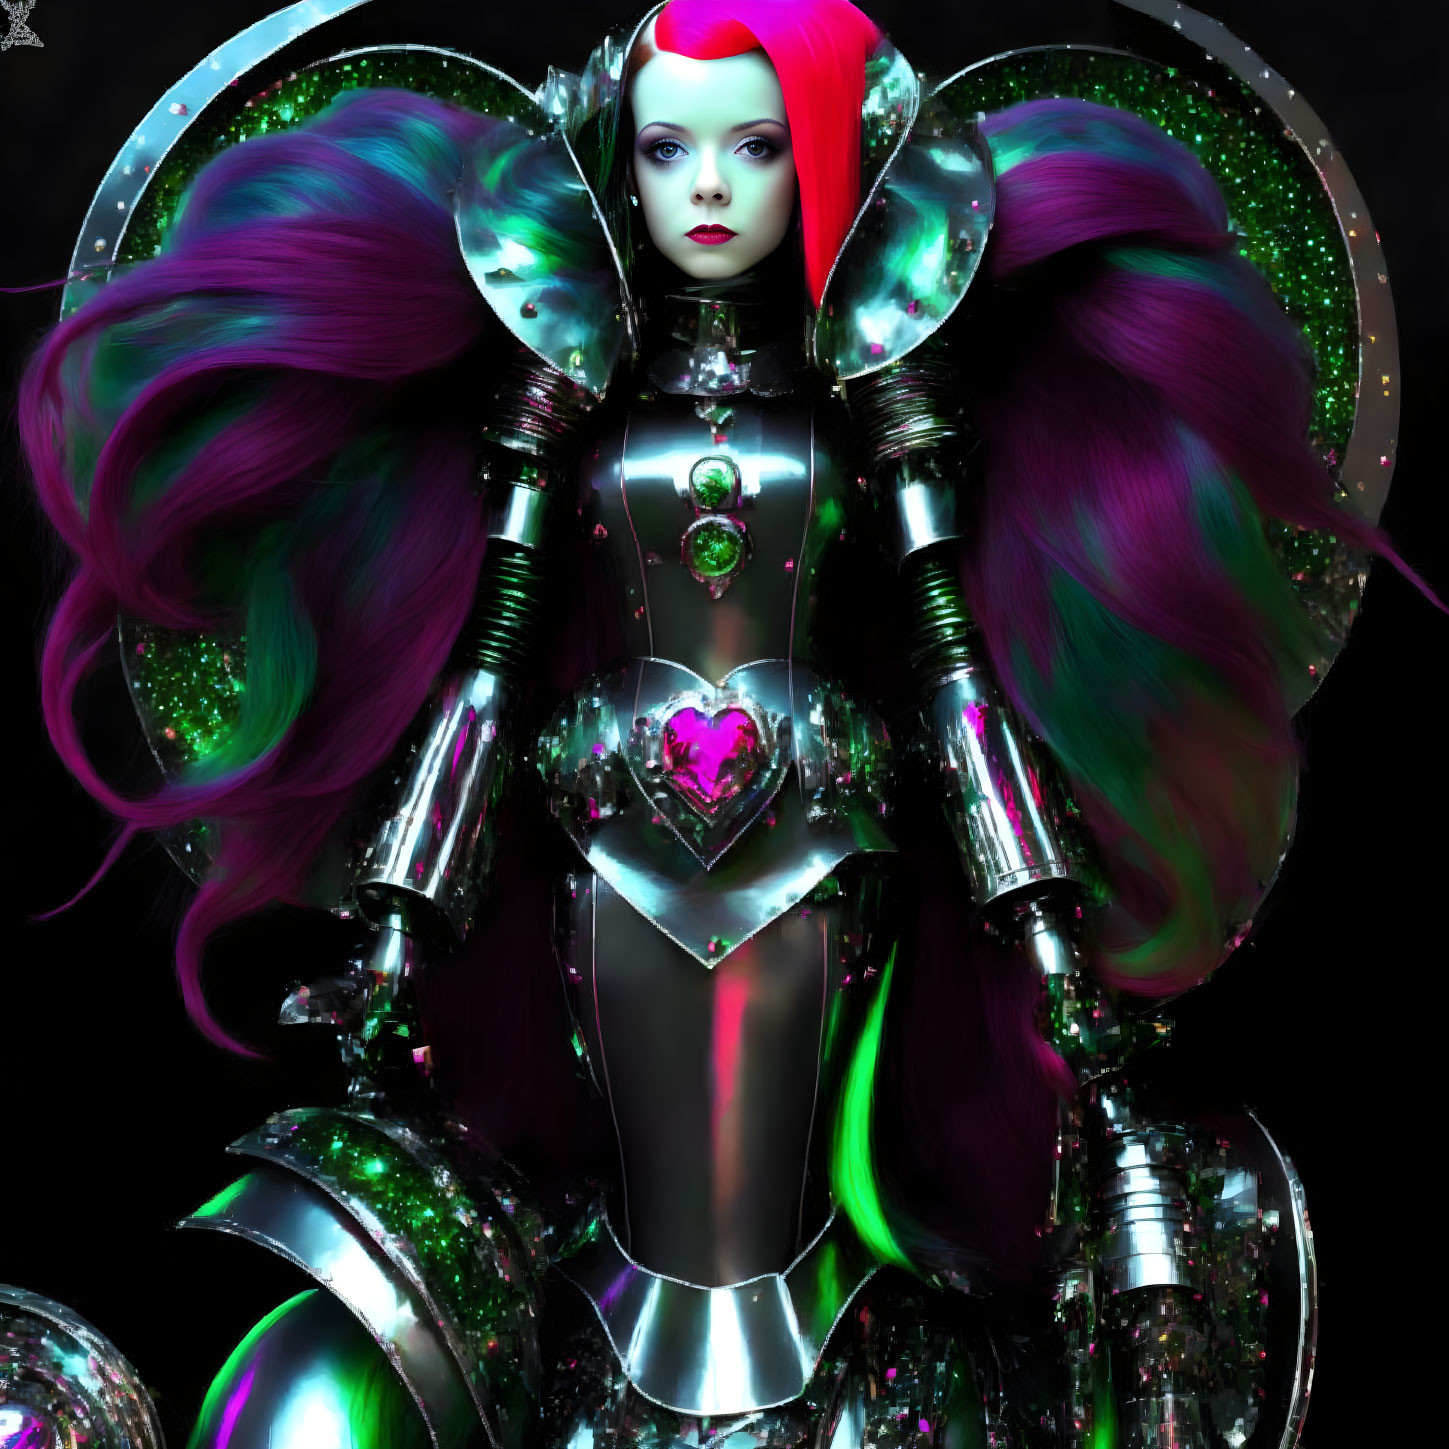 Futuristic female robot with purple hair and heart design on iridescent armor